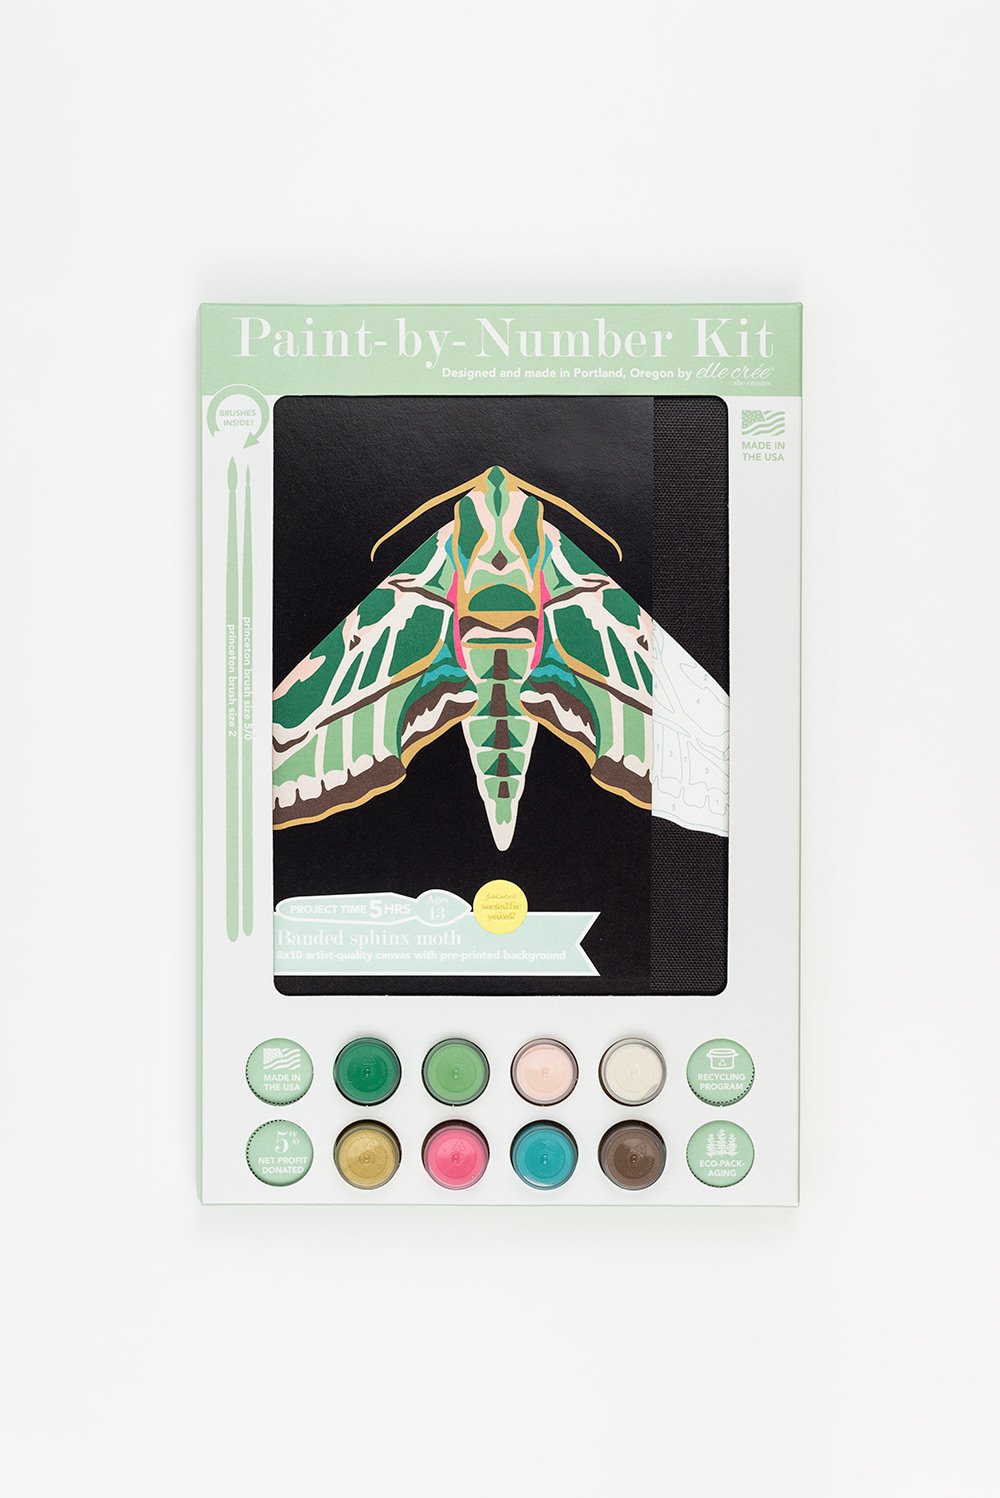 Clementines | Paint-by-Number Kit for Adults — Elle Crée (she creates)